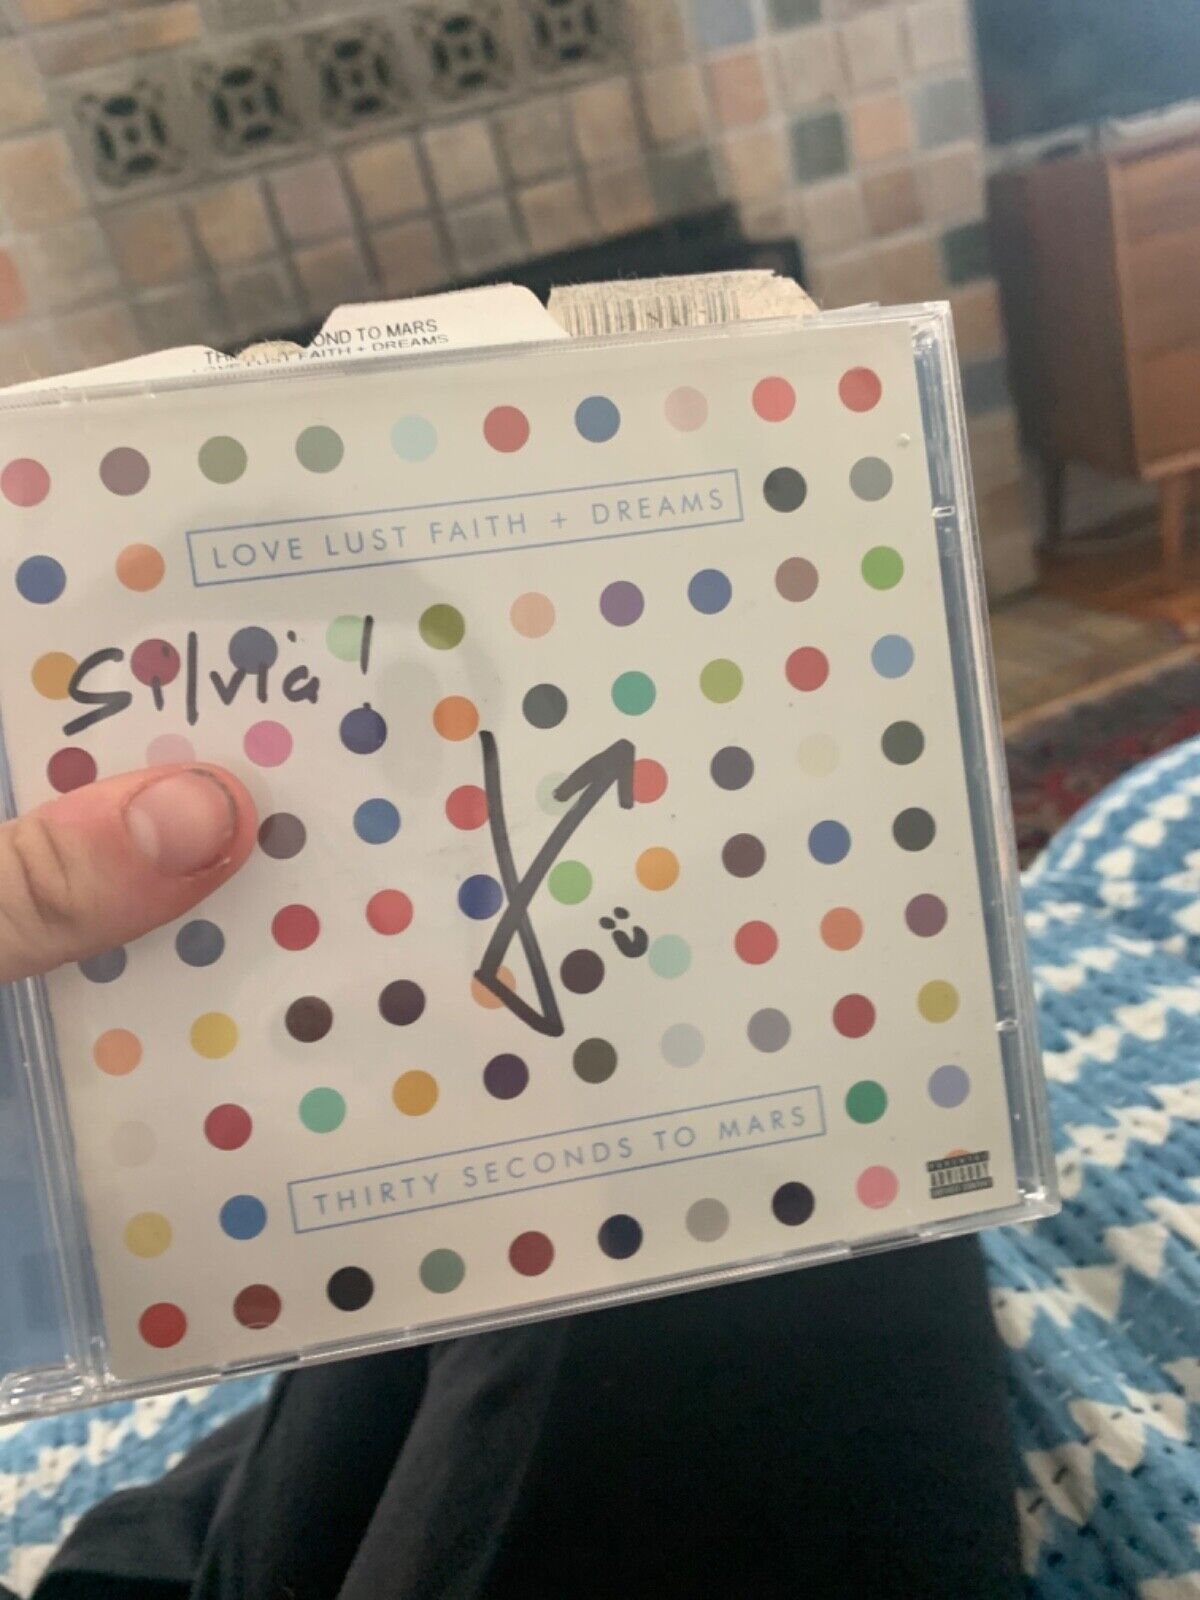 Love Lust Faith + Dreams by 30 Seconds to Mars (CD, 2013) Signed collectors ite 